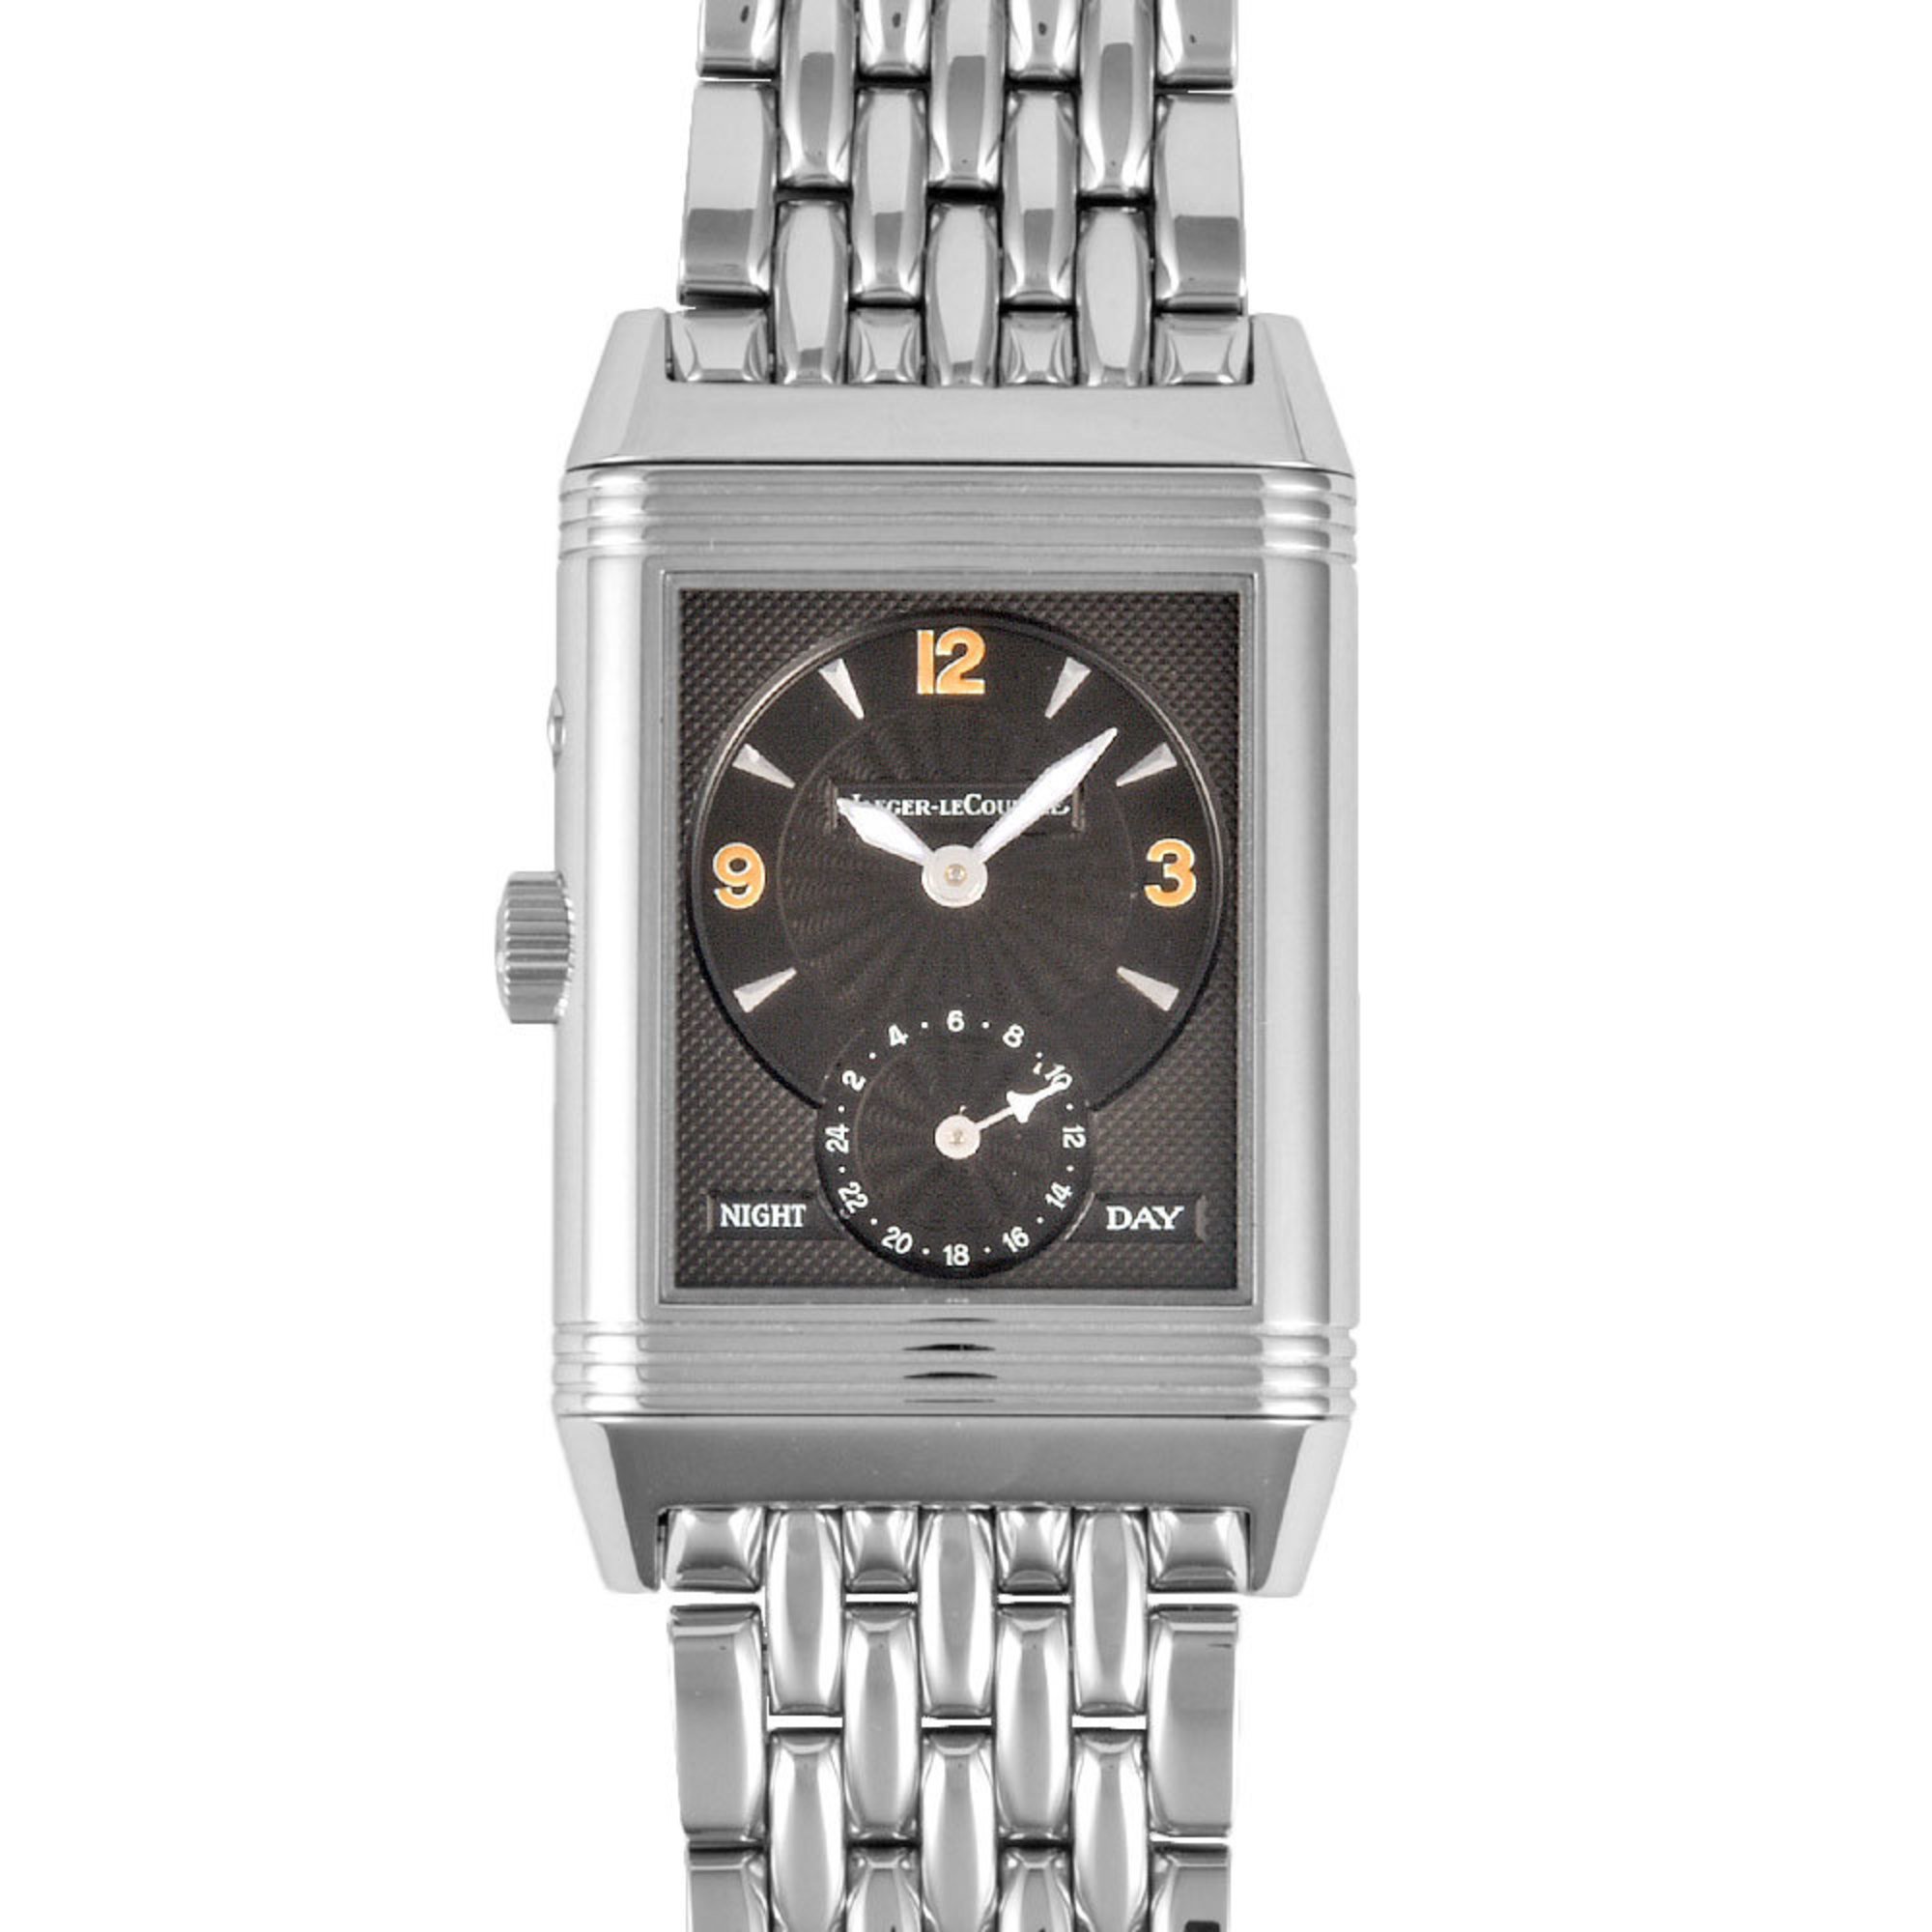 Jaeger-LeCoultre Q2718470 270.8.54 Reverso Duo Night & Day Watch, Hand-wound, Silver Black Dial, Men's